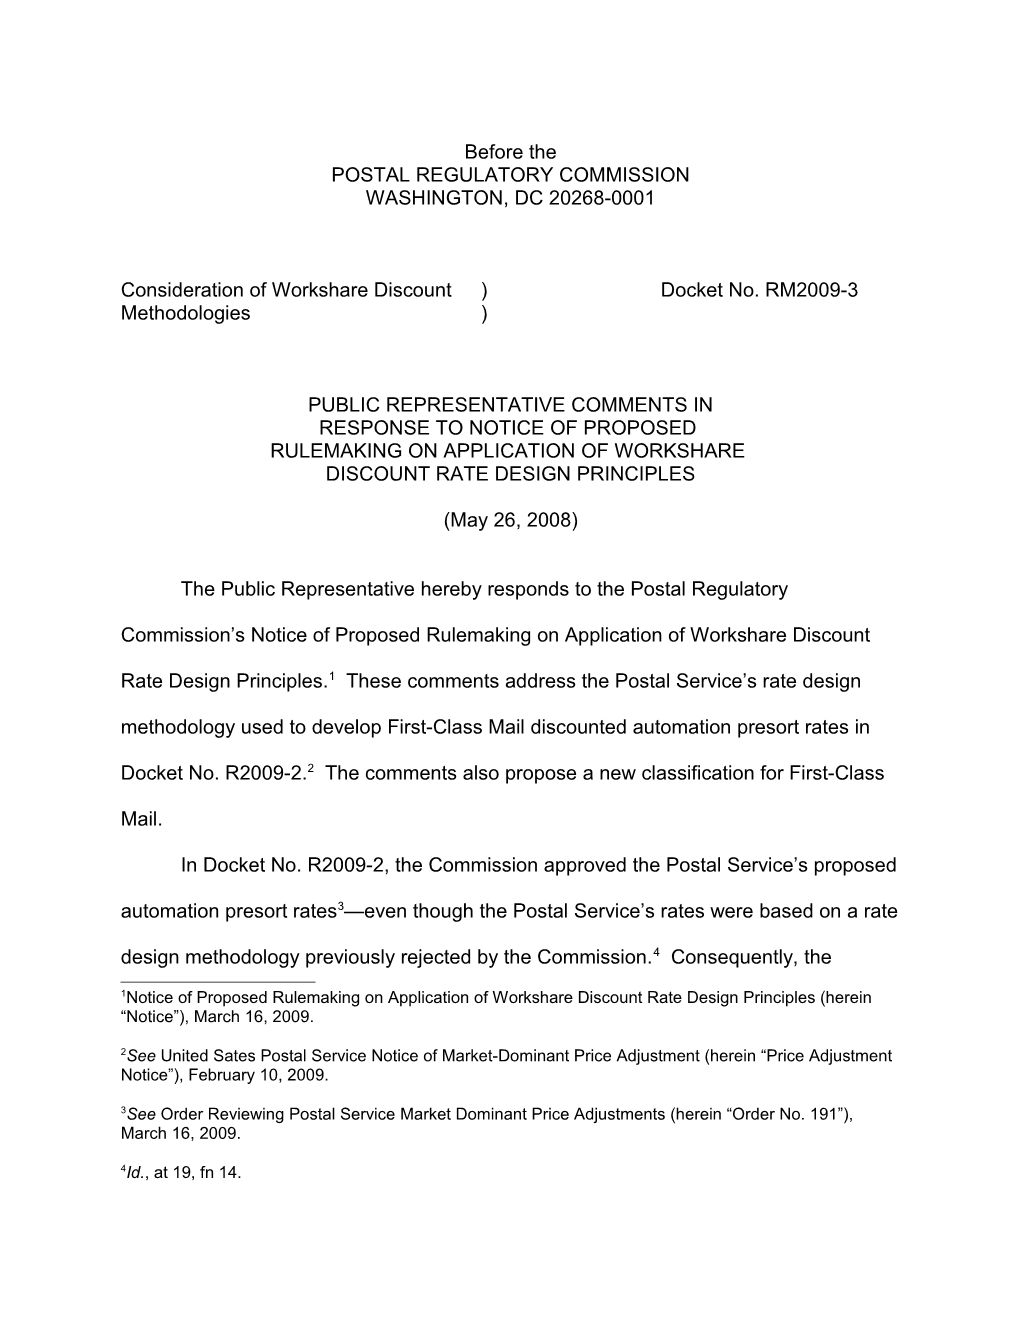 Docket No. RM 2009-3- 1 -PR Comments on Rulemaking